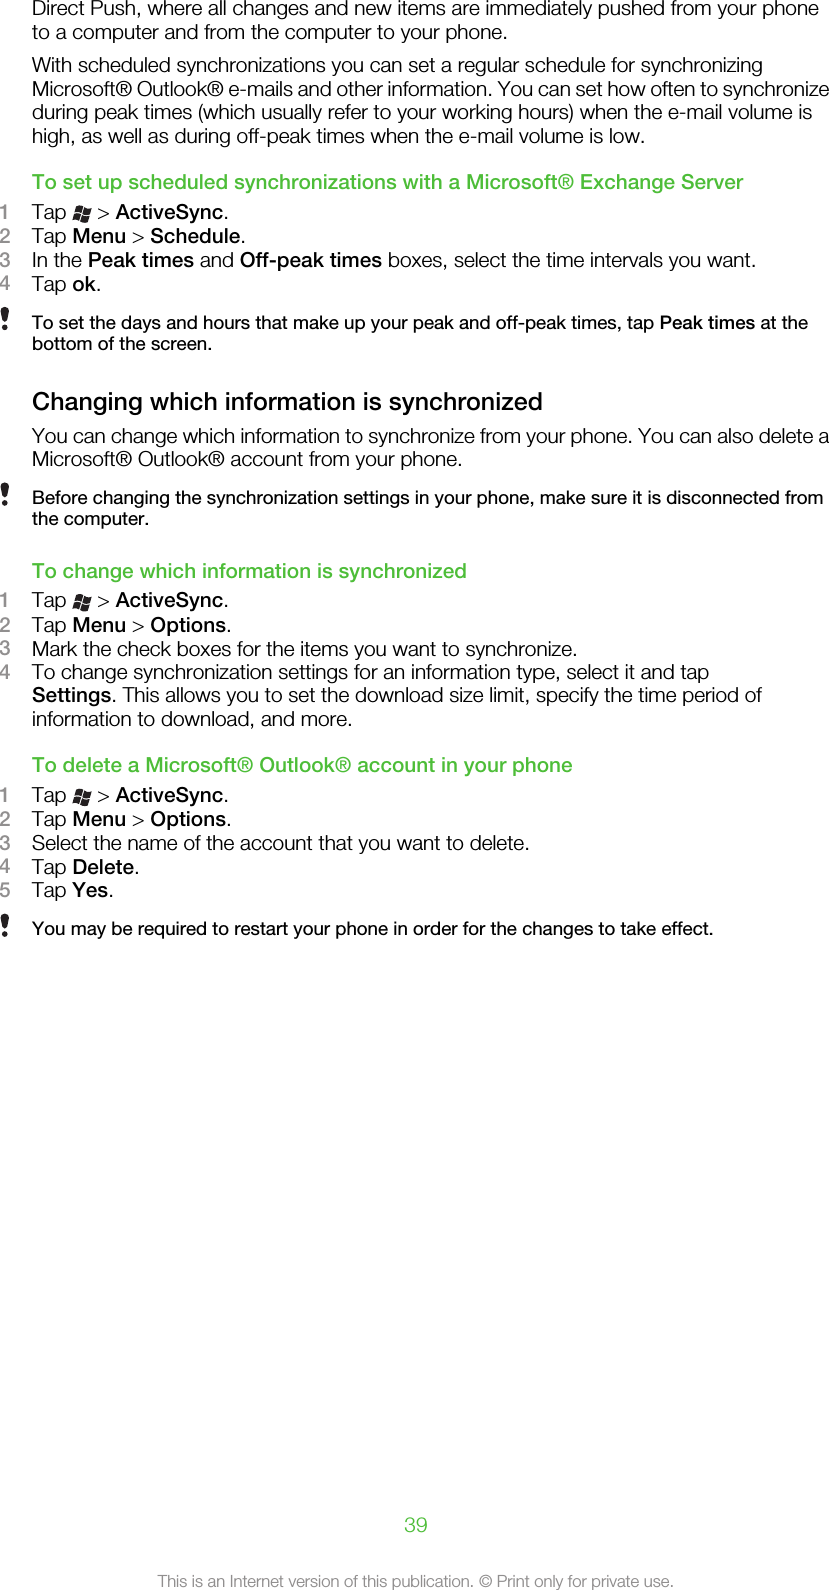 Direct Push, where all changes and new items are immediately pushed from your phoneto a computer and from the computer to your phone.With scheduled synchronizations you can set a regular schedule for synchronizingMicrosoft® Outlook® e-mails and other information. You can set how often to synchronizeduring peak times (which usually refer to your working hours) when the e-mail volume ishigh, as well as during off-peak times when the e-mail volume is low.To set up scheduled synchronizations with a Microsoft® Exchange Server1Tap   &gt; ActiveSync.2Tap Menu &gt; Schedule.3In the Peak times and Off-peak times boxes, select the time intervals you want.4Tap ok.To set the days and hours that make up your peak and off-peak times, tap Peak times at thebottom of the screen.Changing which information is synchronizedYou can change which information to synchronize from your phone. You can also delete aMicrosoft® Outlook® account from your phone.Before changing the synchronization settings in your phone, make sure it is disconnected fromthe computer.To change which information is synchronized1Tap   &gt; ActiveSync.2Tap Menu &gt; Options.3Mark the check boxes for the items you want to synchronize.4To change synchronization settings for an information type, select it and tapSettings. This allows you to set the download size limit, specify the time period ofinformation to download, and more.To delete a Microsoft® Outlook® account in your phone1Tap   &gt; ActiveSync.2Tap Menu &gt; Options.3Select the name of the account that you want to delete.4Tap Delete.5Tap Yes.You may be required to restart your phone in order for the changes to take effect.39This is an Internet version of this publication. © Print only for private use.